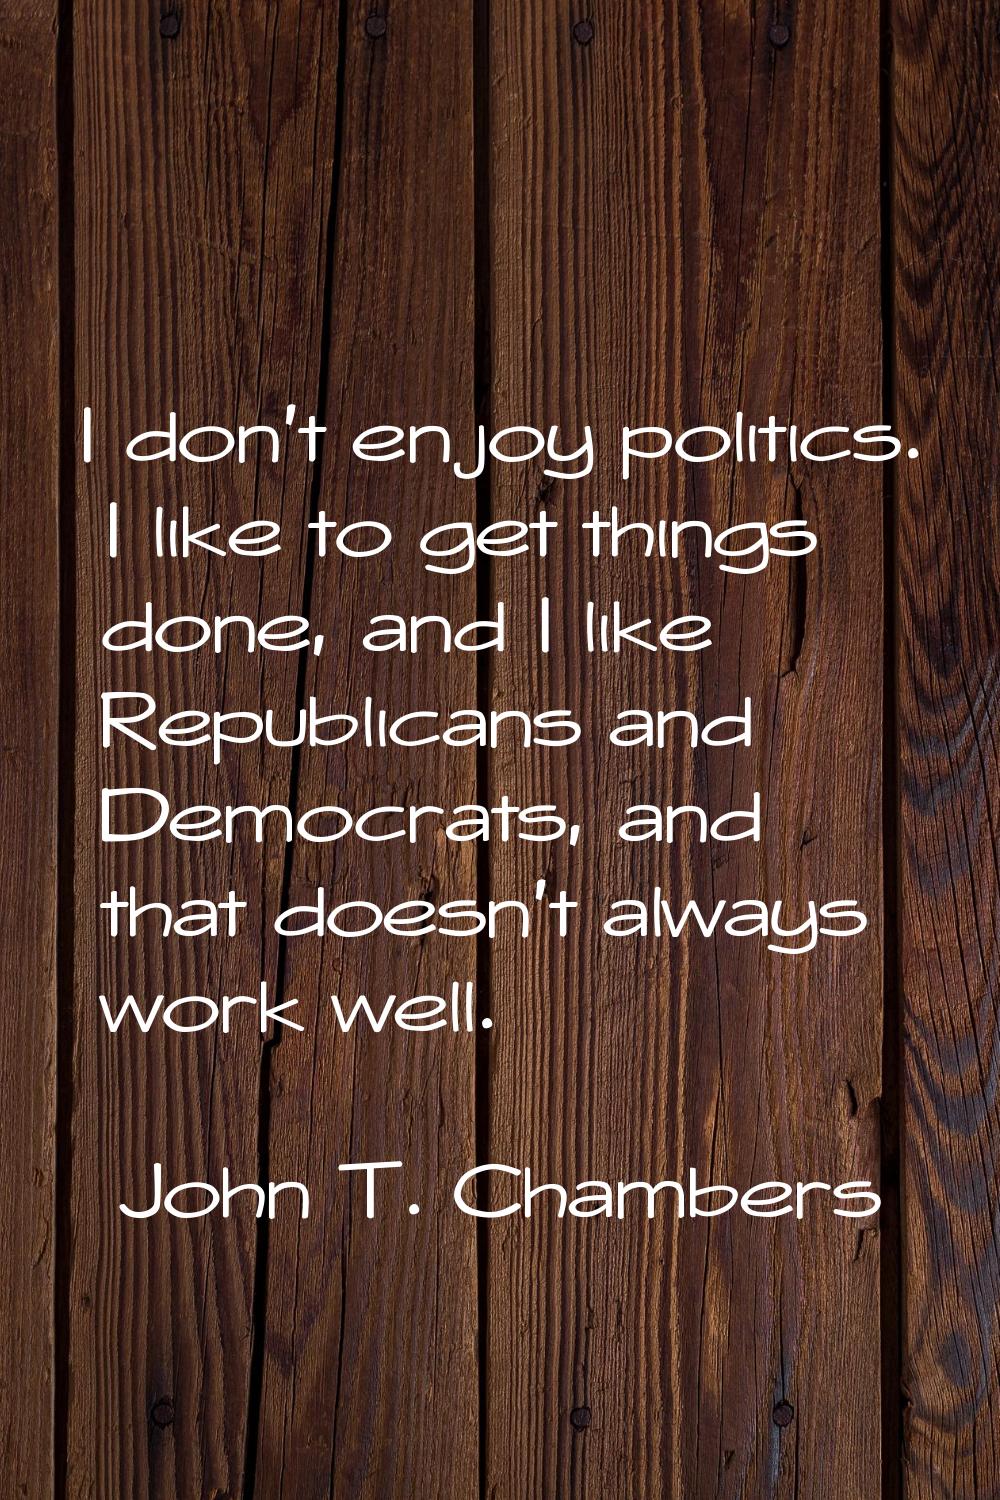 I don't enjoy politics. I like to get things done, and I like Republicans and Democrats, and that d